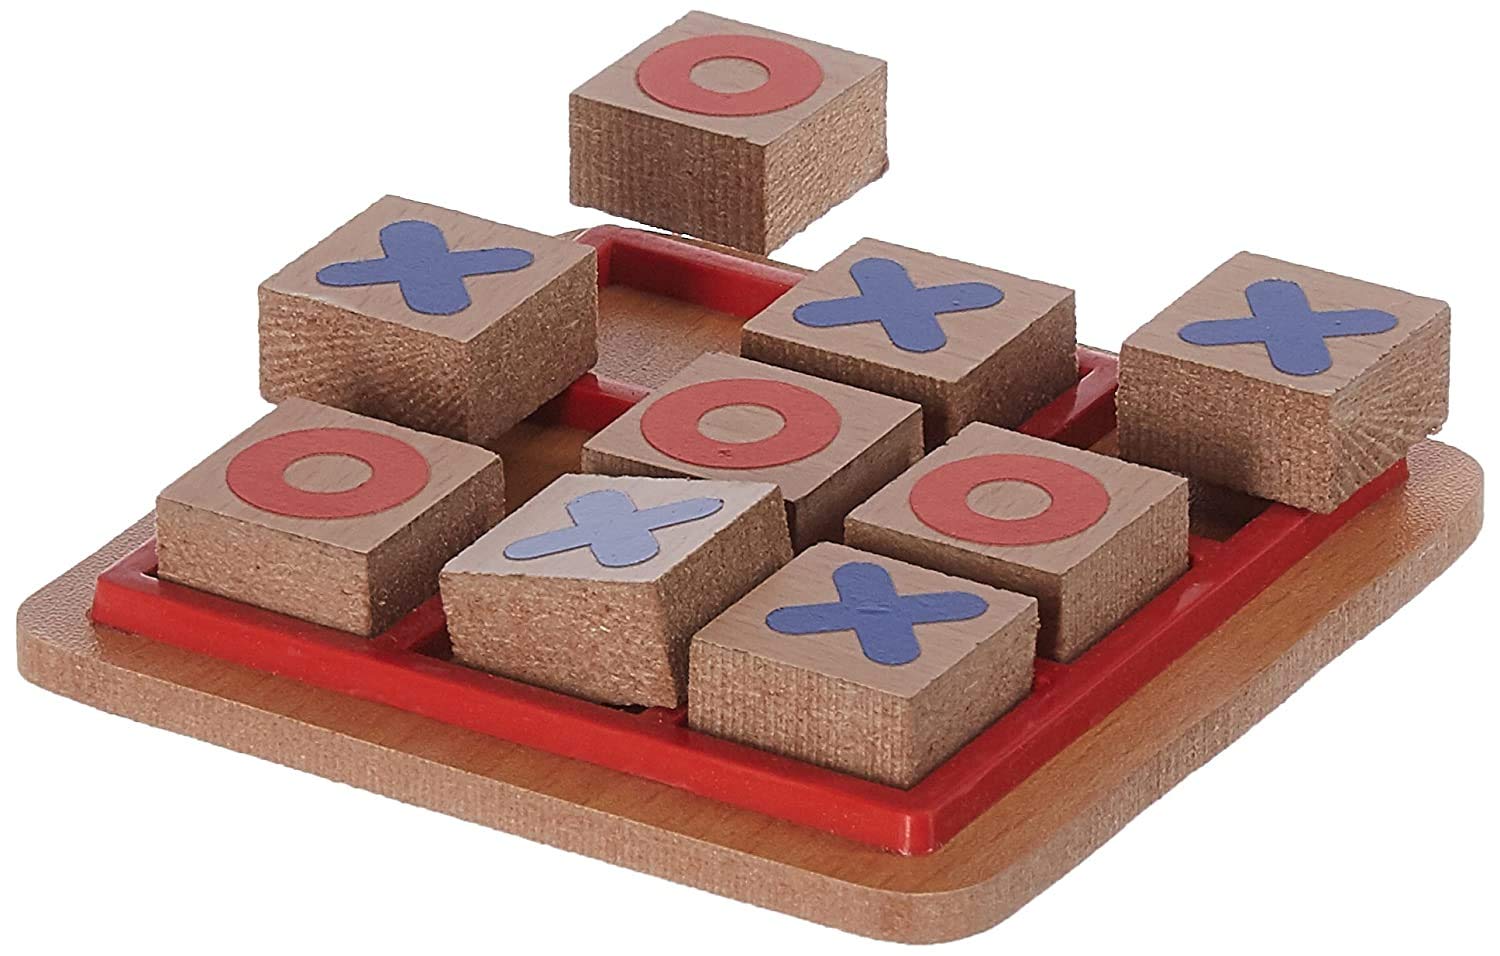 MANNAT Wooden Tic Tac Toe Zero & Cross Board Game |Strategy Game|Party Game|Outdoor & Indoor Game|Perfect for Gift|for Kids and Adults(Pack of 1)